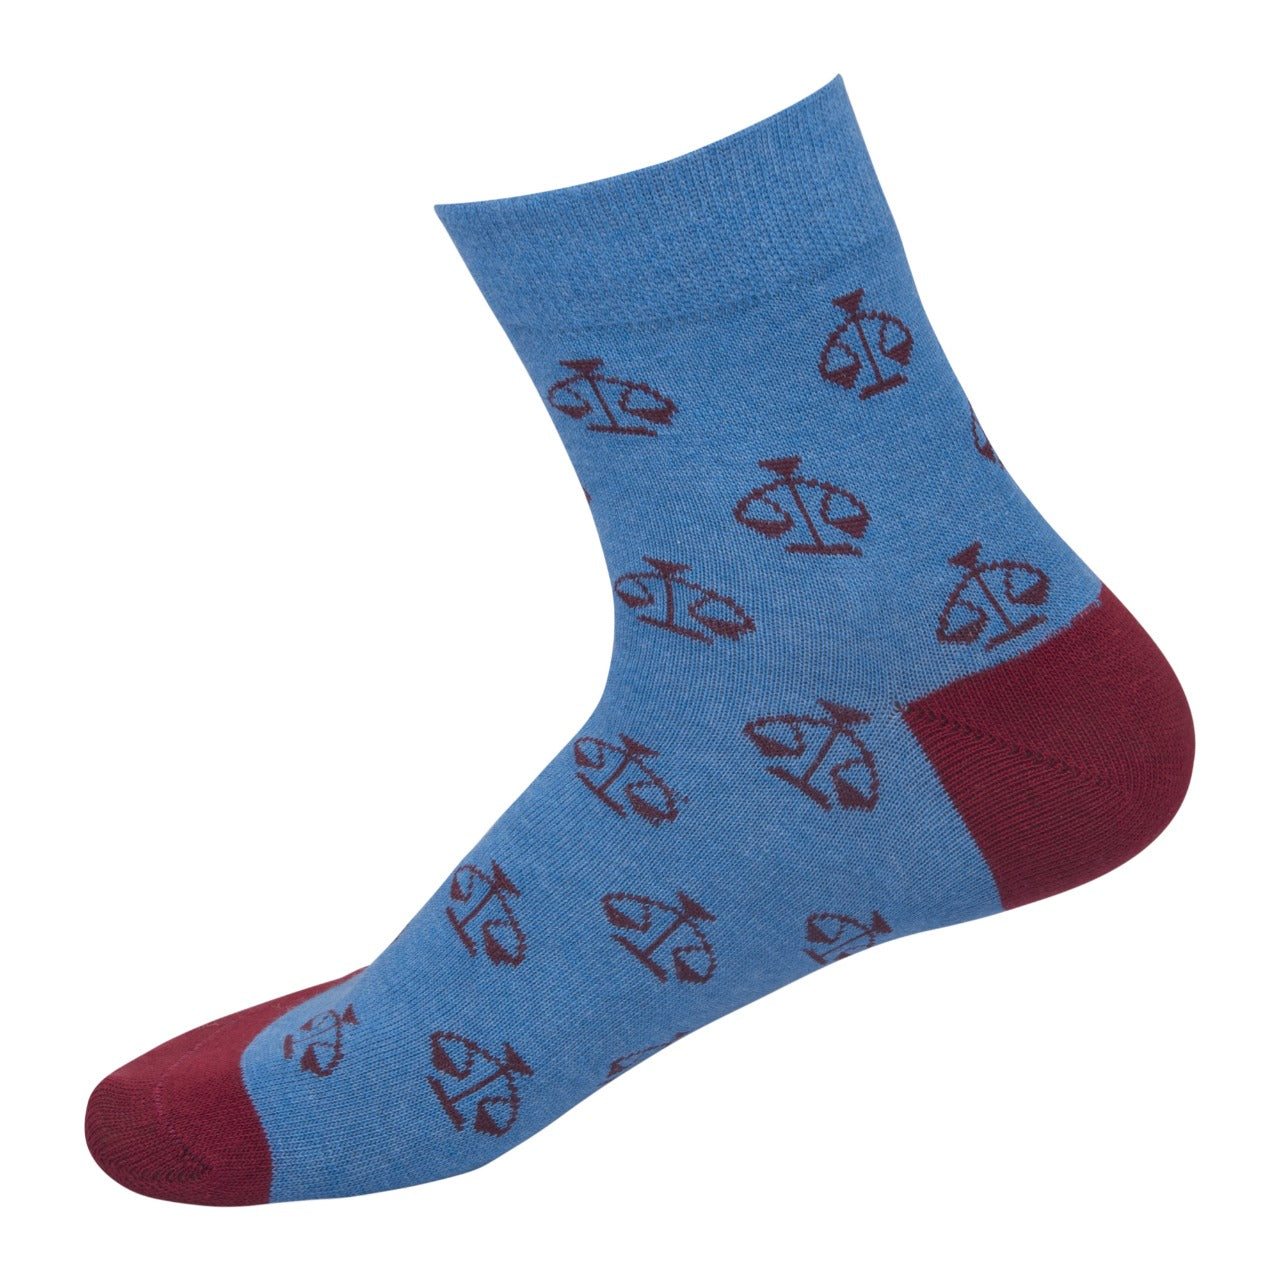 The Sassy Solicitor Socks - Ankle Length | Scales of Justice Socks | Blue with Maroon Pattern